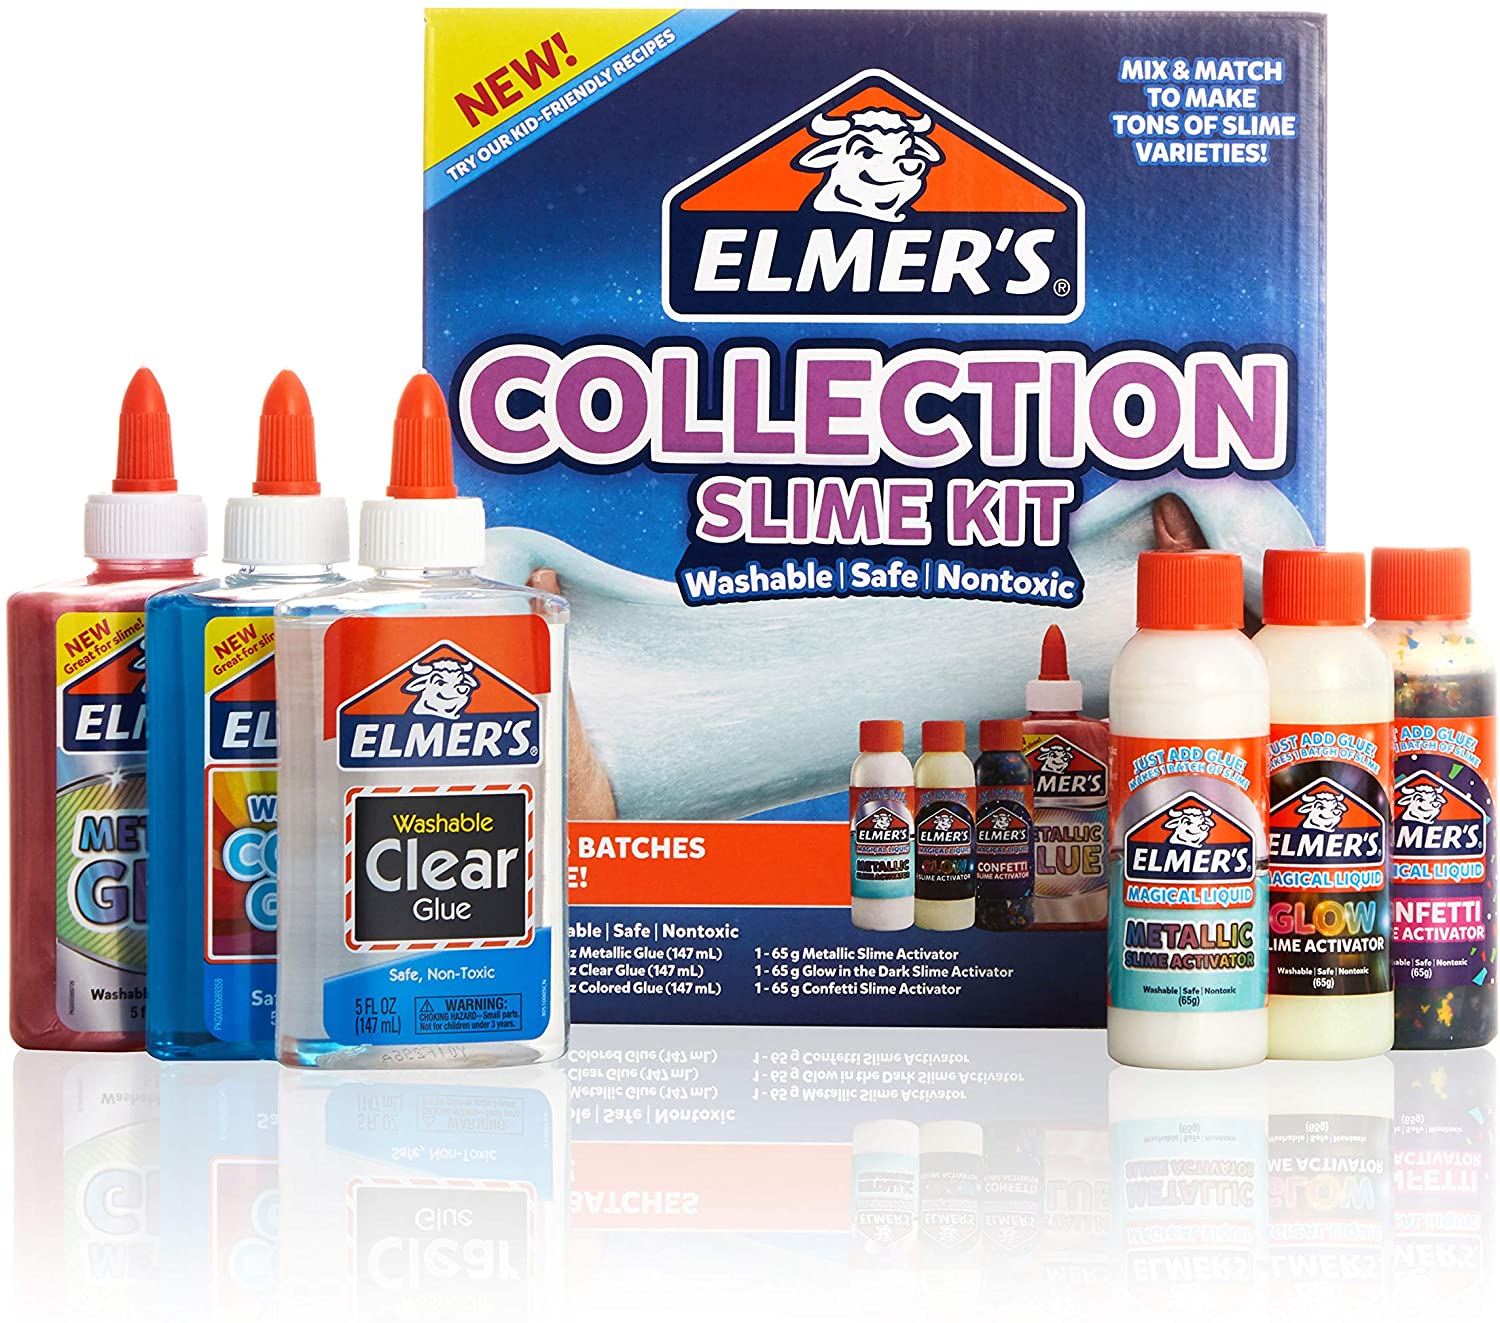 6-Piece Elmer's Collection Slime Kit Supplies (Glow In The Dark Slime Activator, Metallic Magical Liquid, Confetti Magical Liquid, More) $8.49 + free shipping w/ Prime or on $25+